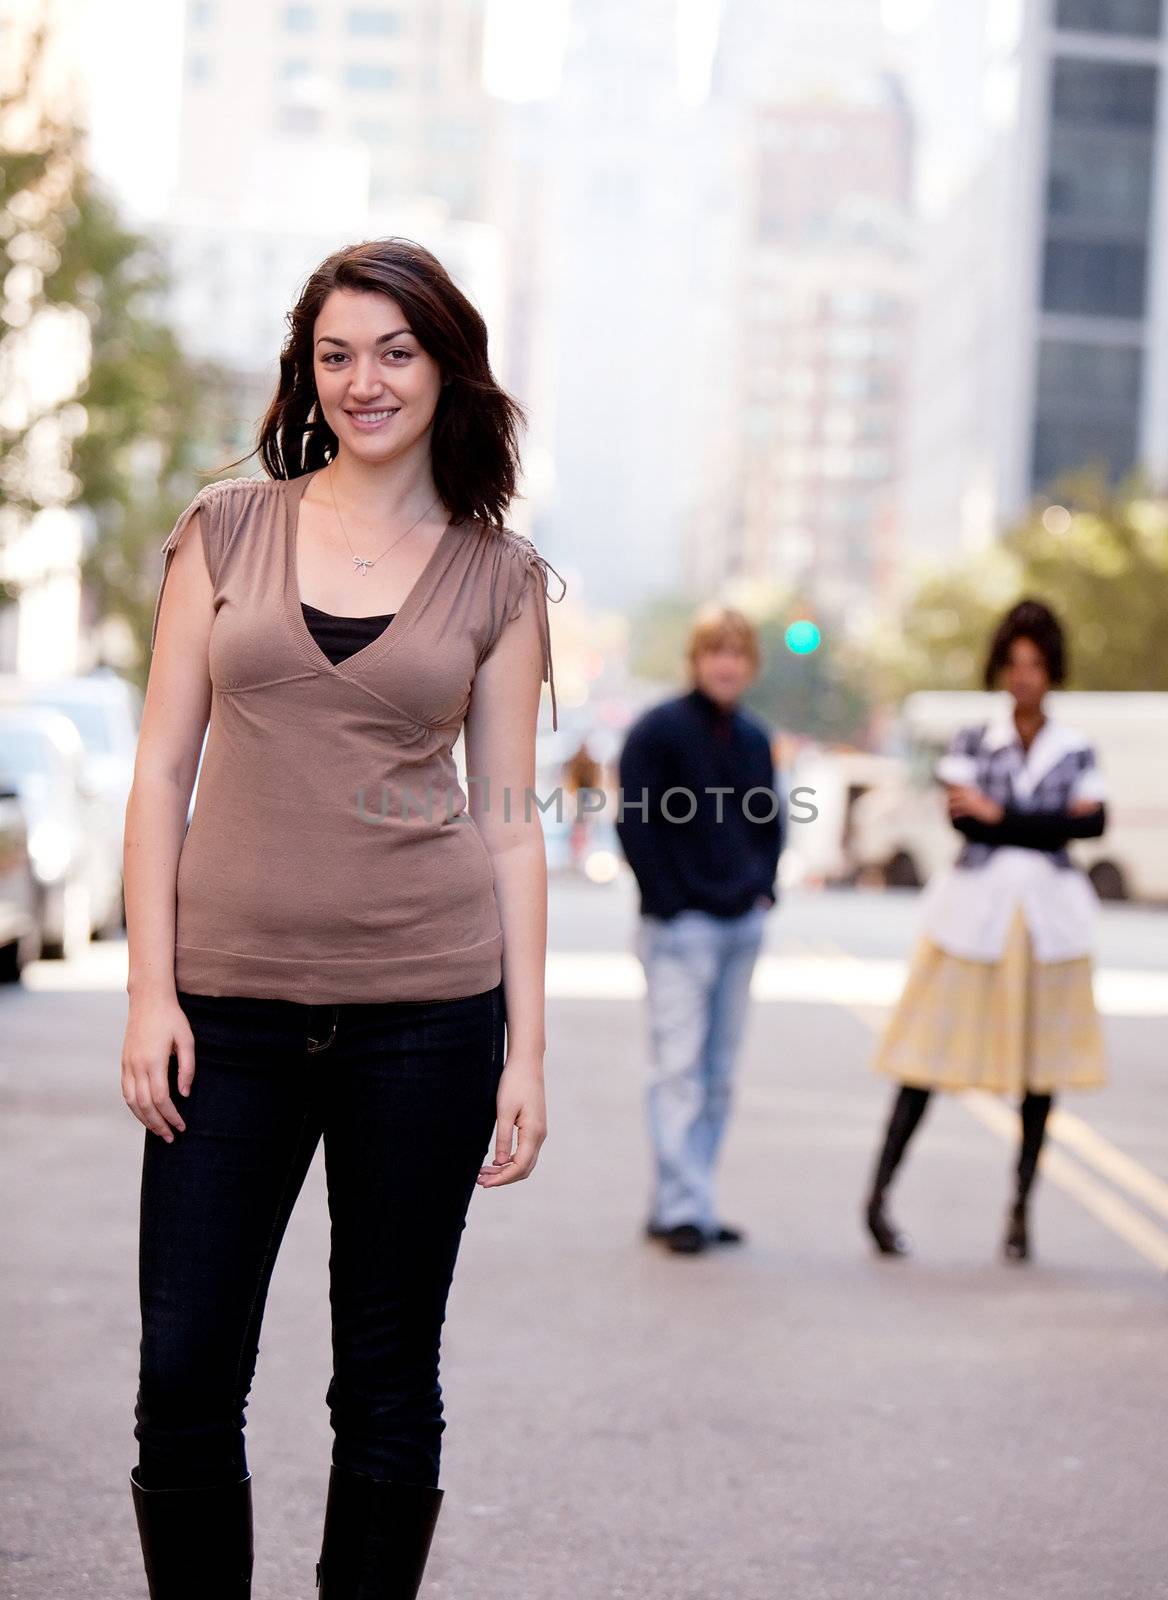 A young woman in a city setting with friends in the background